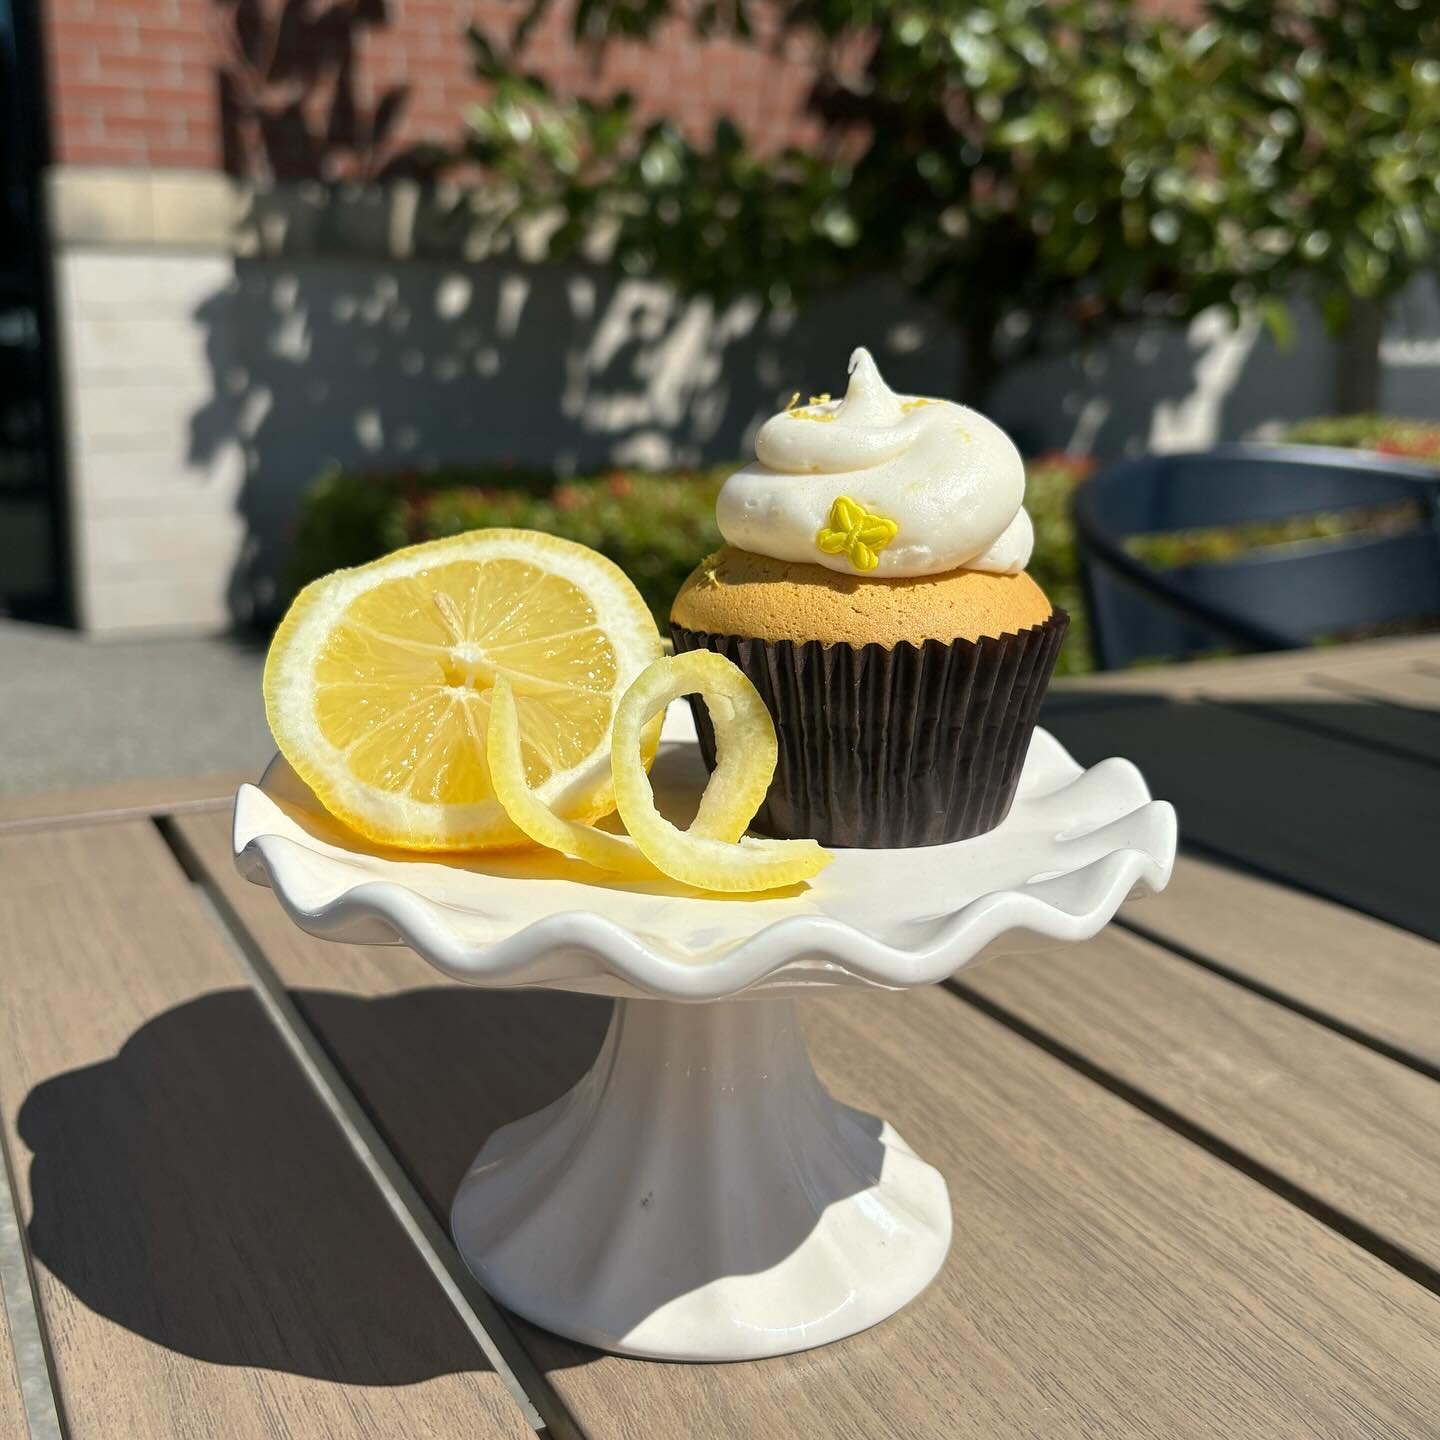 When life gives you lemons, we make cupcakes!! 🍋🍋

Stop by the Simply Lemonade Stand and try our NEW Zesty Lemon Cupcake!! Available for the next 2 weeks